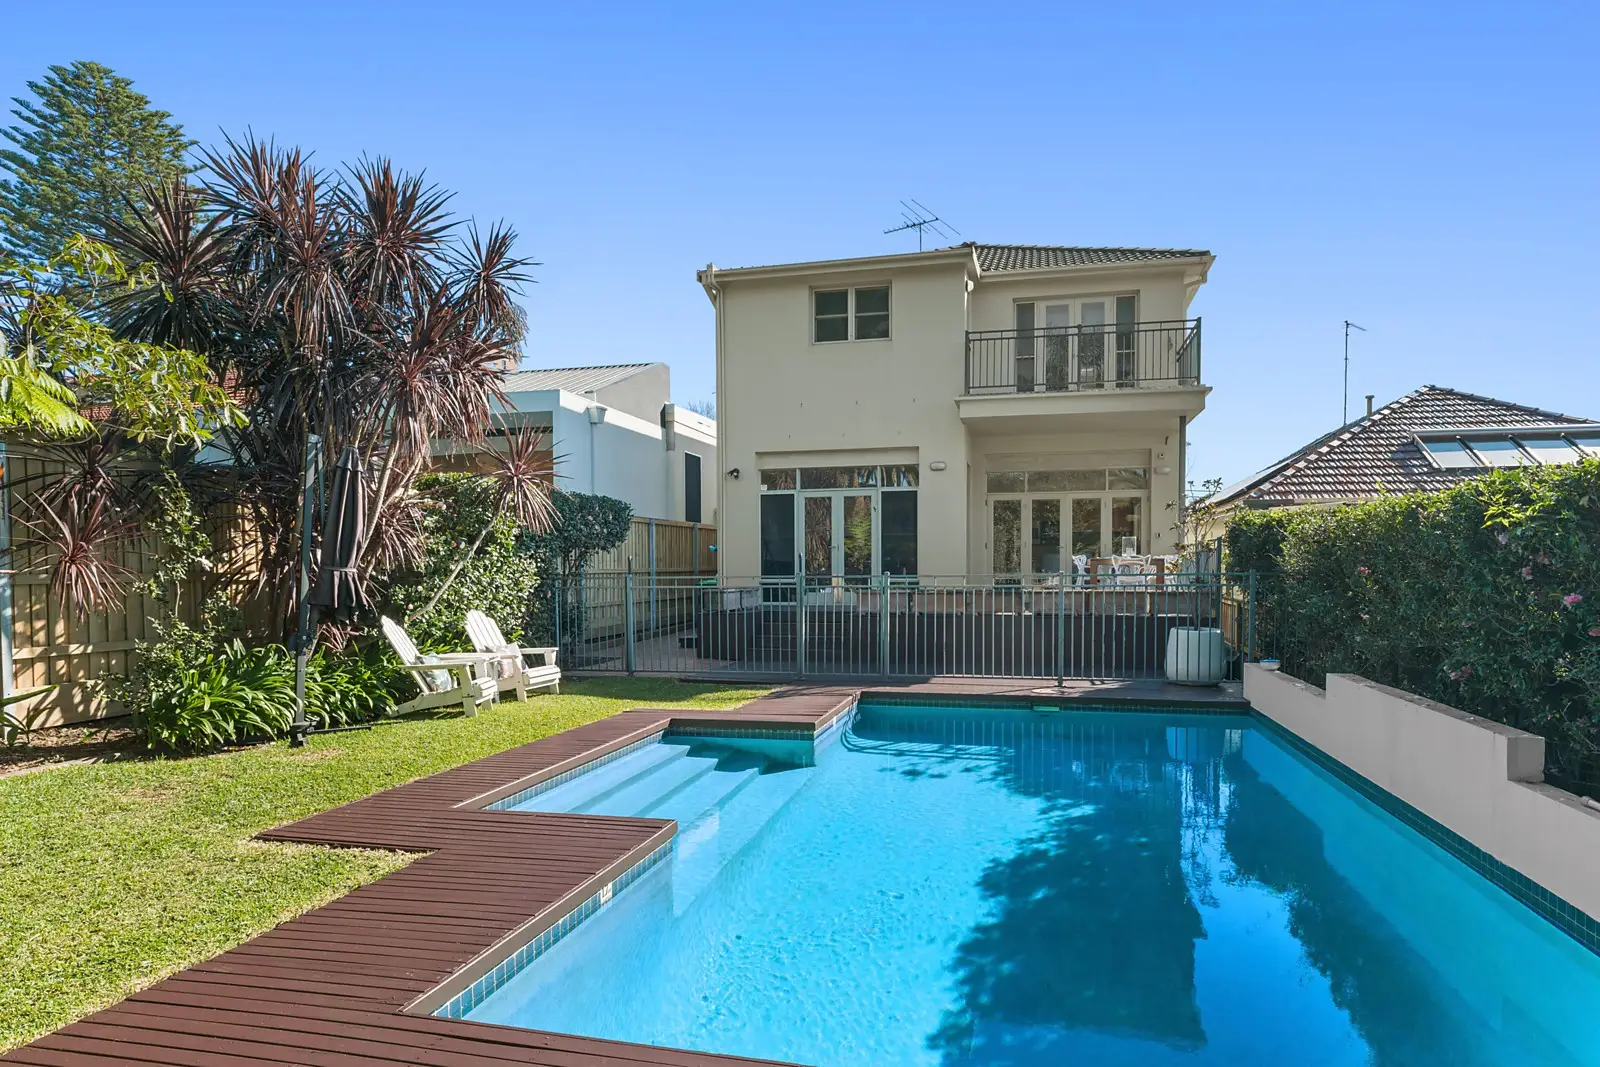 Photo #1: 9 Clarendon Street, Vaucluse - Sold by Sydney Sotheby's International Realty